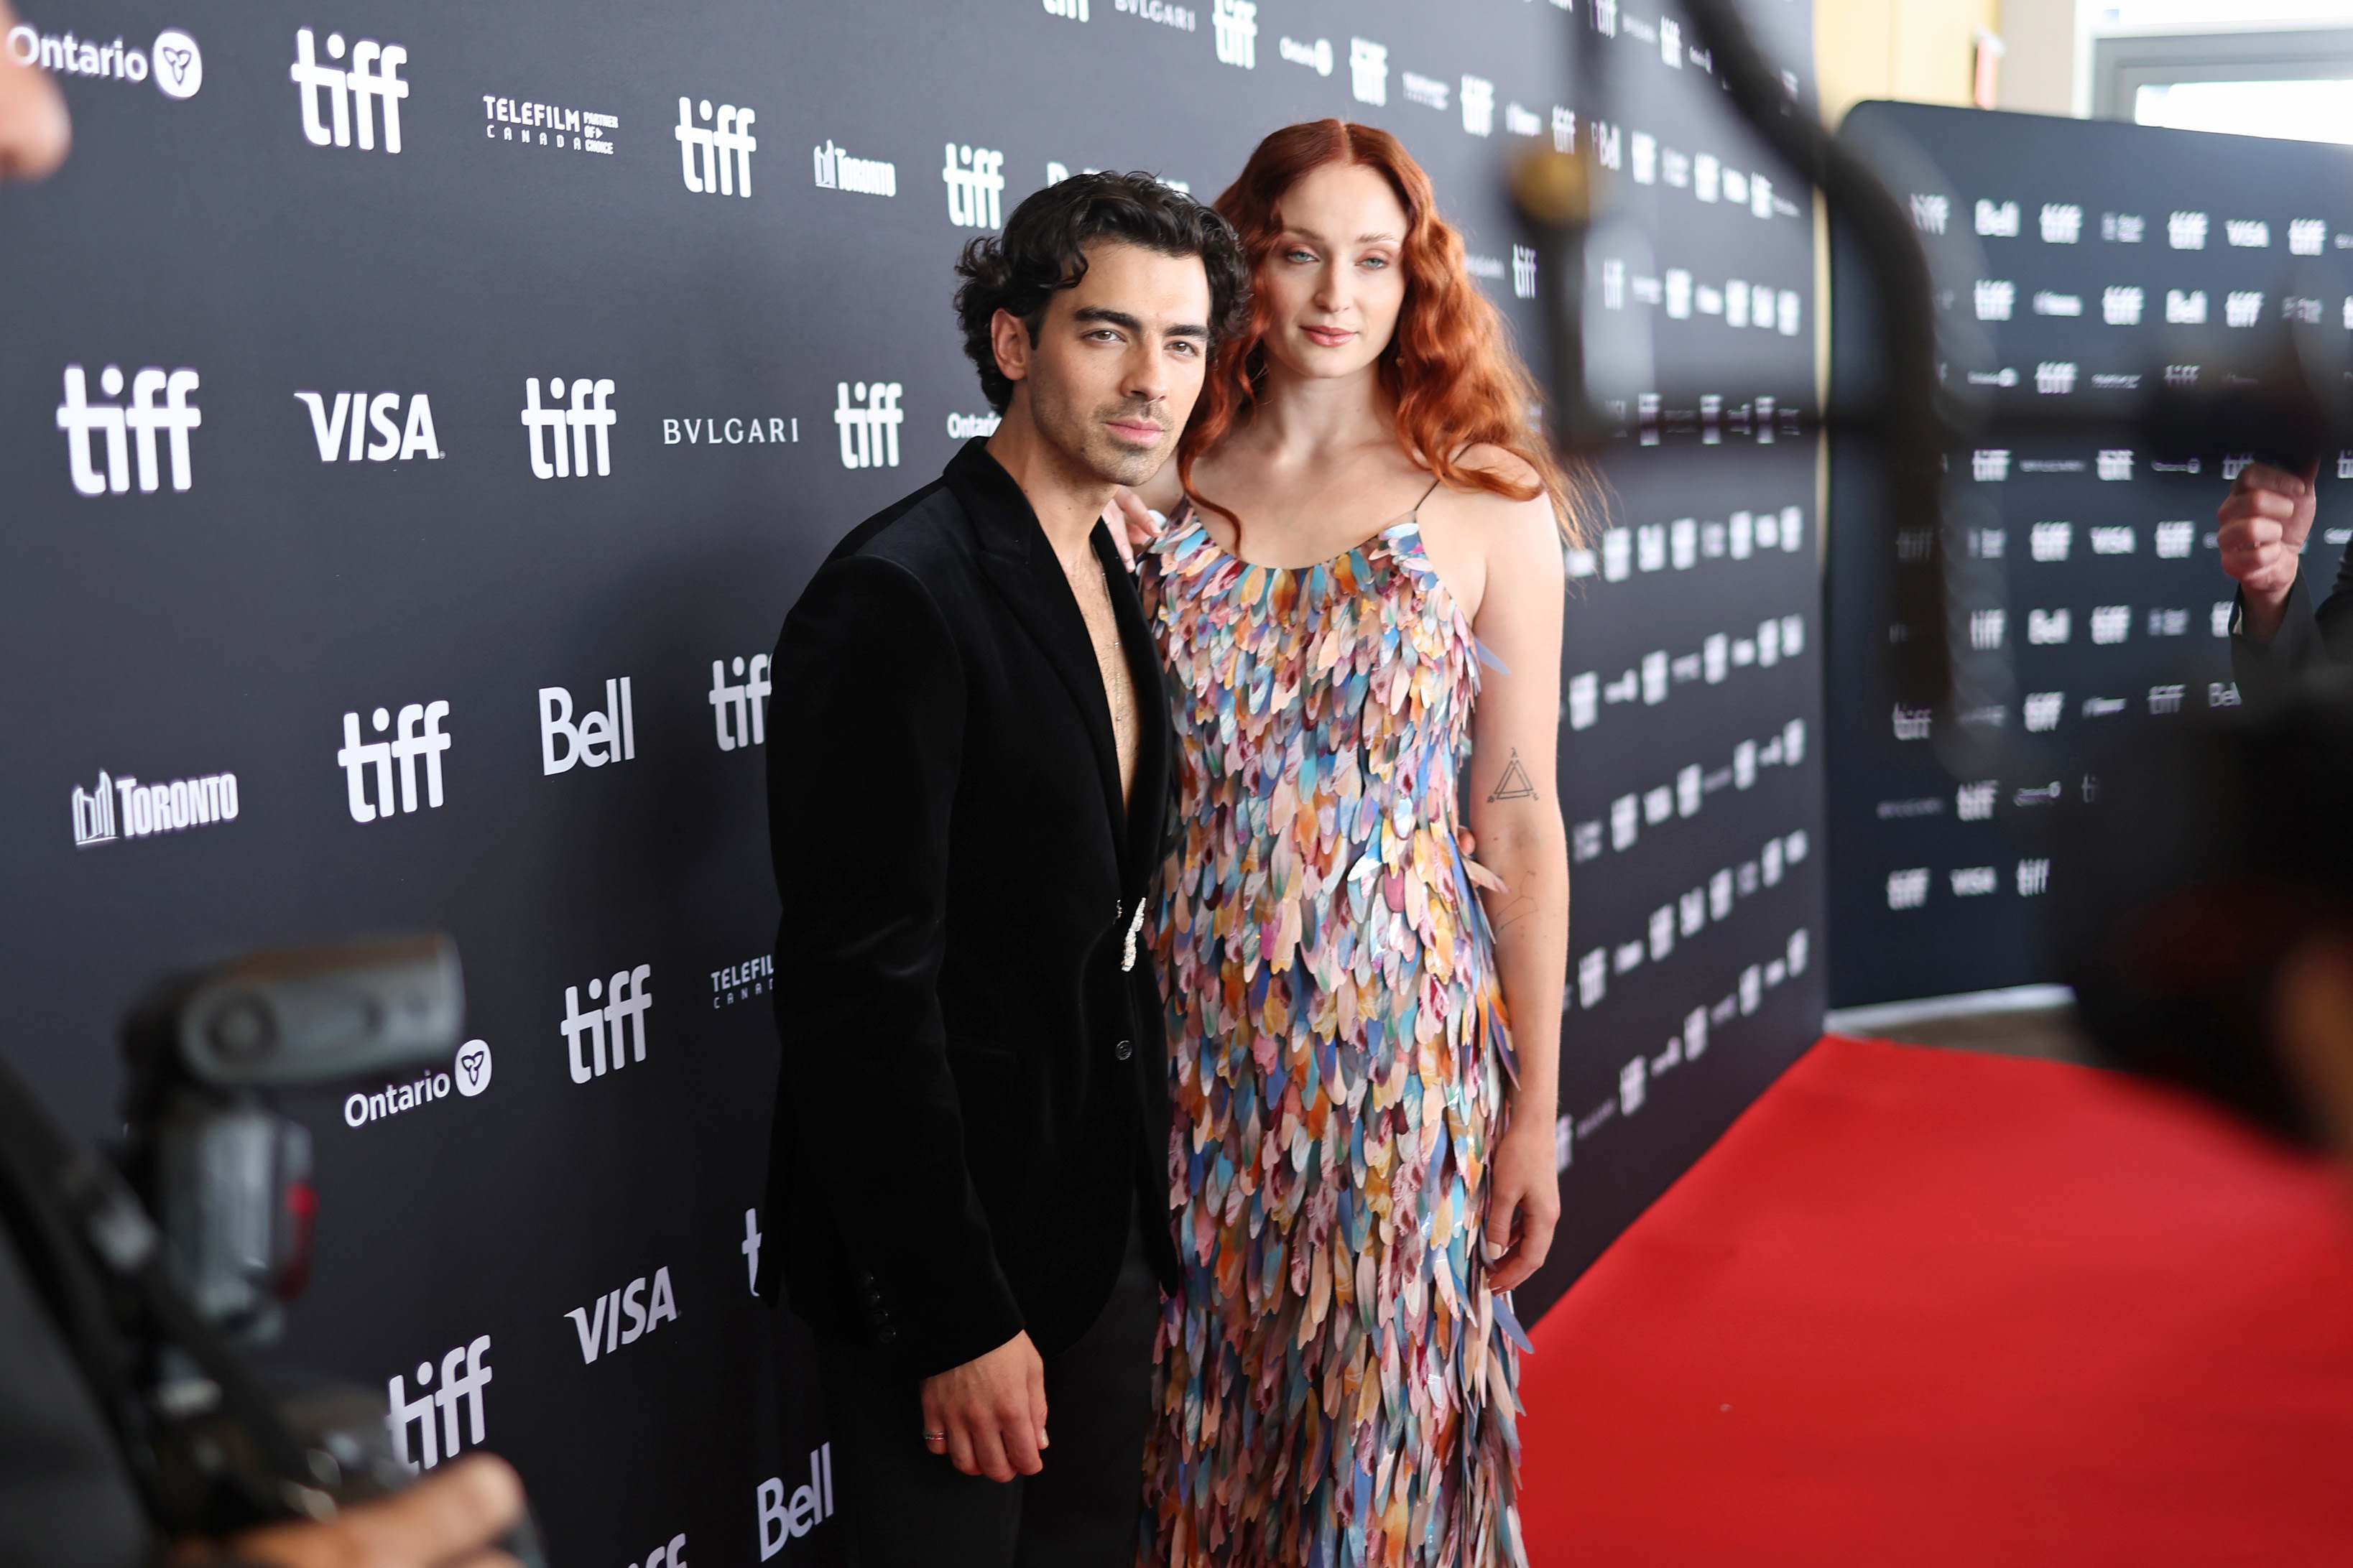 Joe Jonas and Sophie Turner pose together at a TIFF event; the man in a black suit and the woman in a floral dress